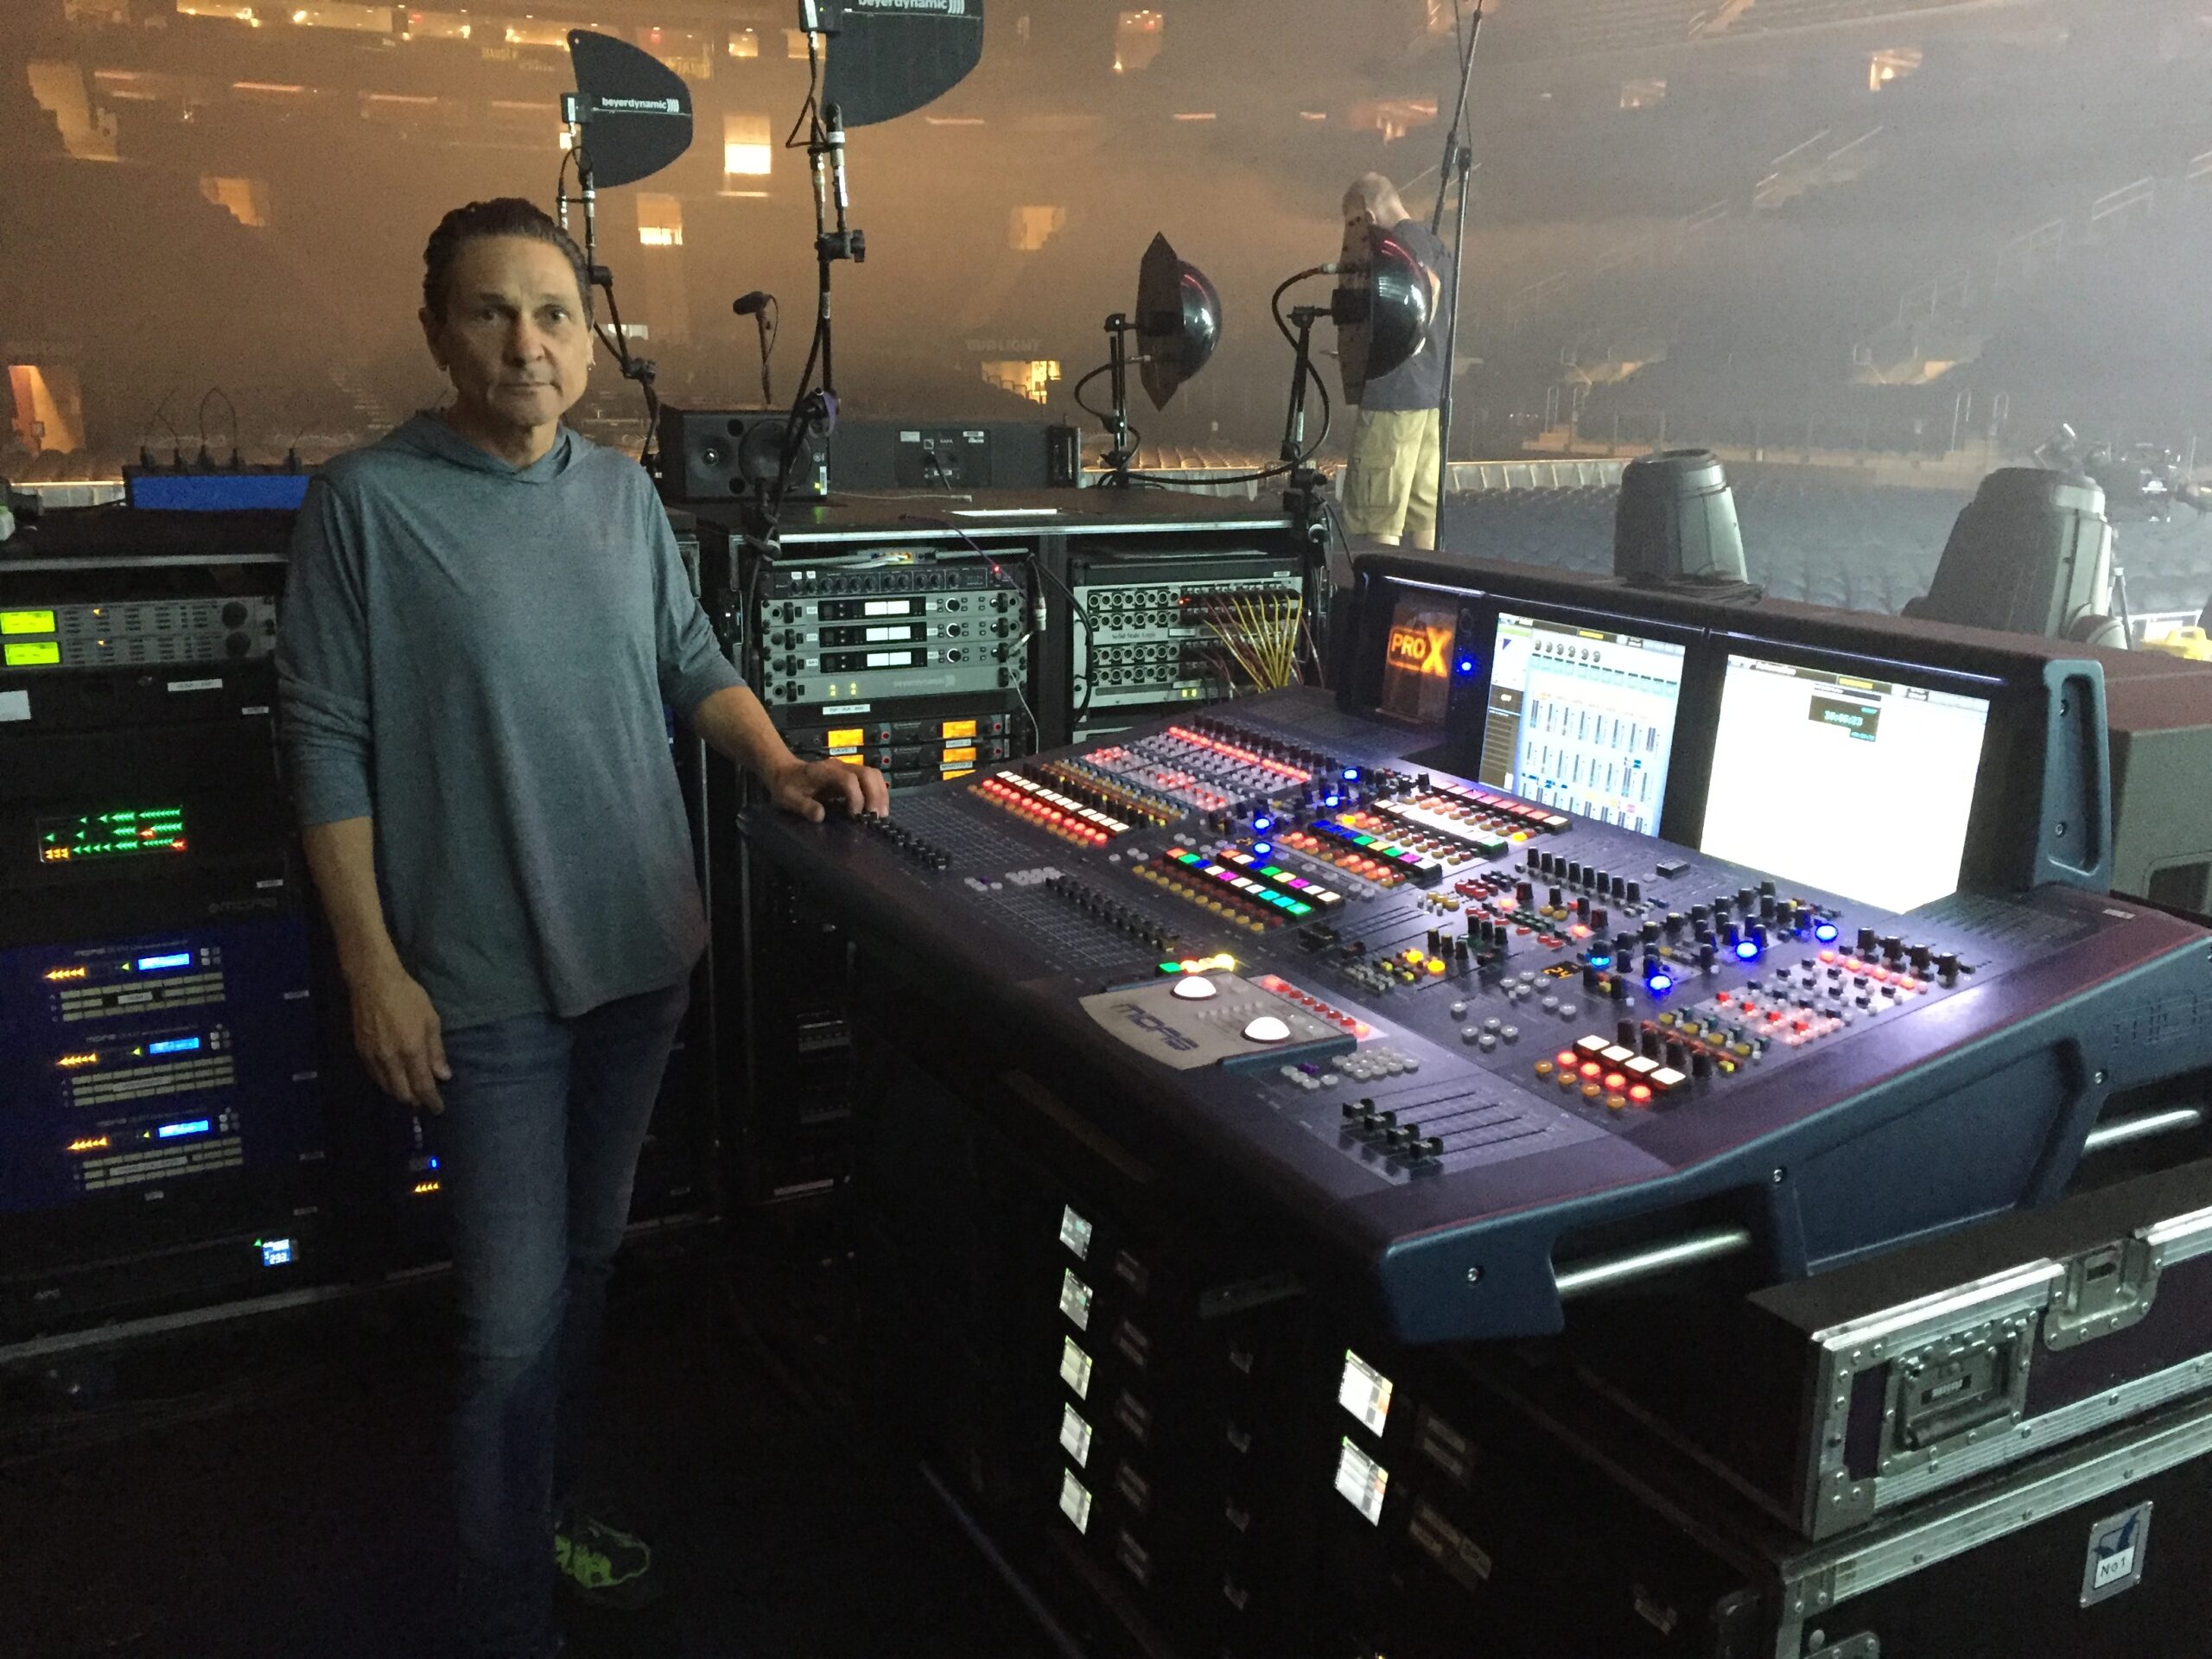 Sarne Thorogood, monitor man for Depeche Mode for 20 years, oversees a Midas ProX desk at stageside. Photo: Clive Young, Future.